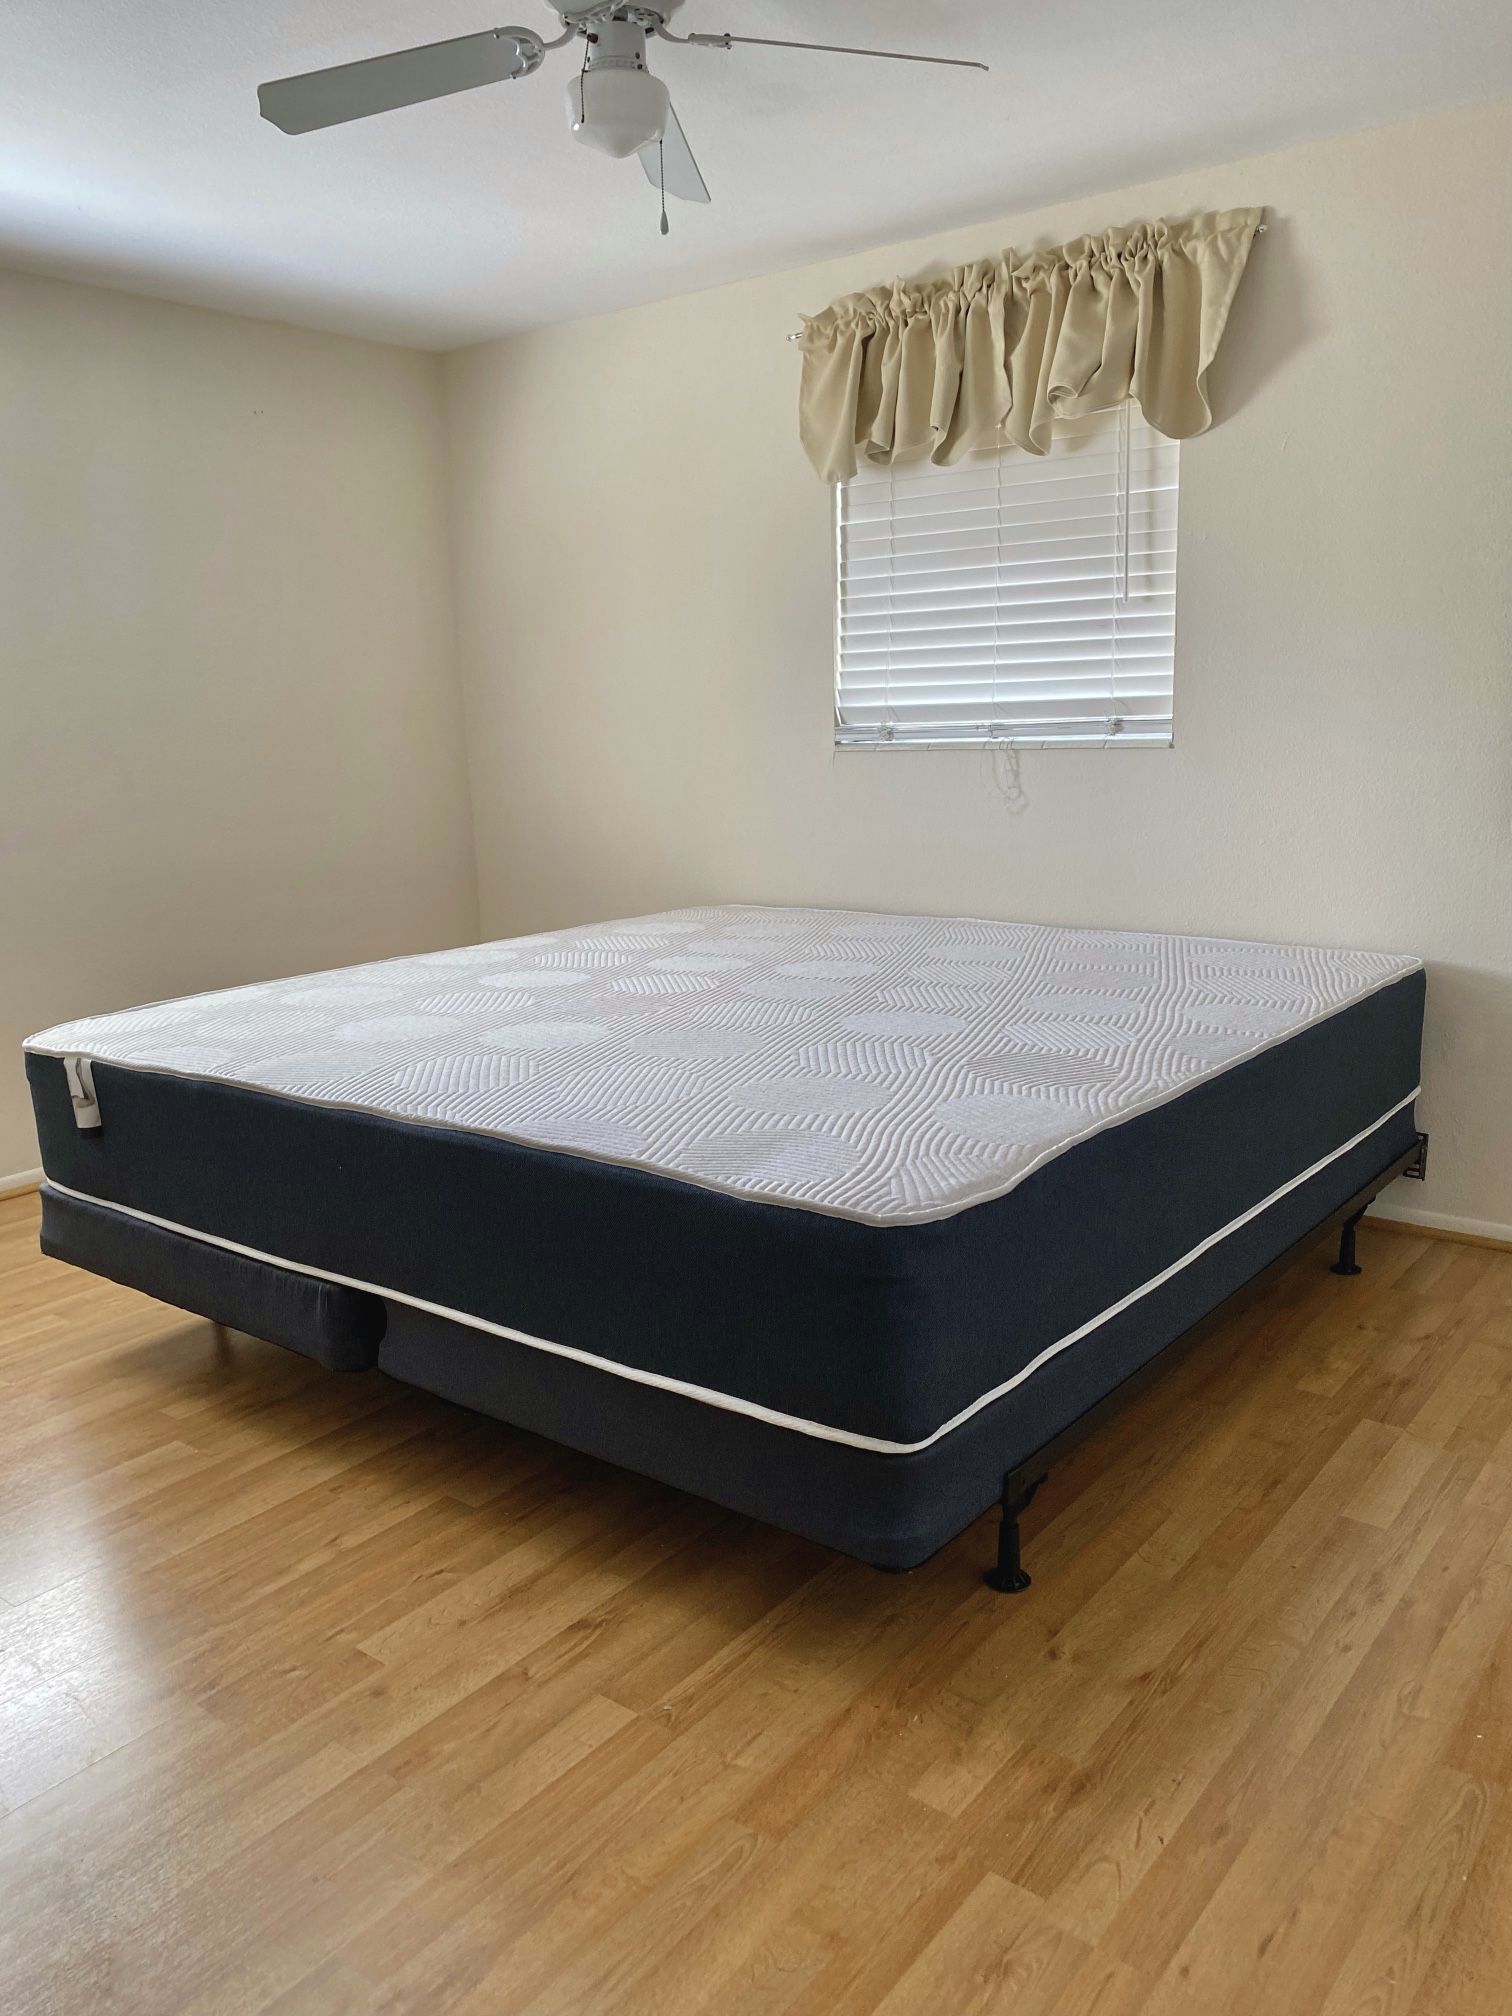 King Size Mattress 10 Inches With Box Springs And Metal Bed Frame High Quality Available All Size. Delivery Available